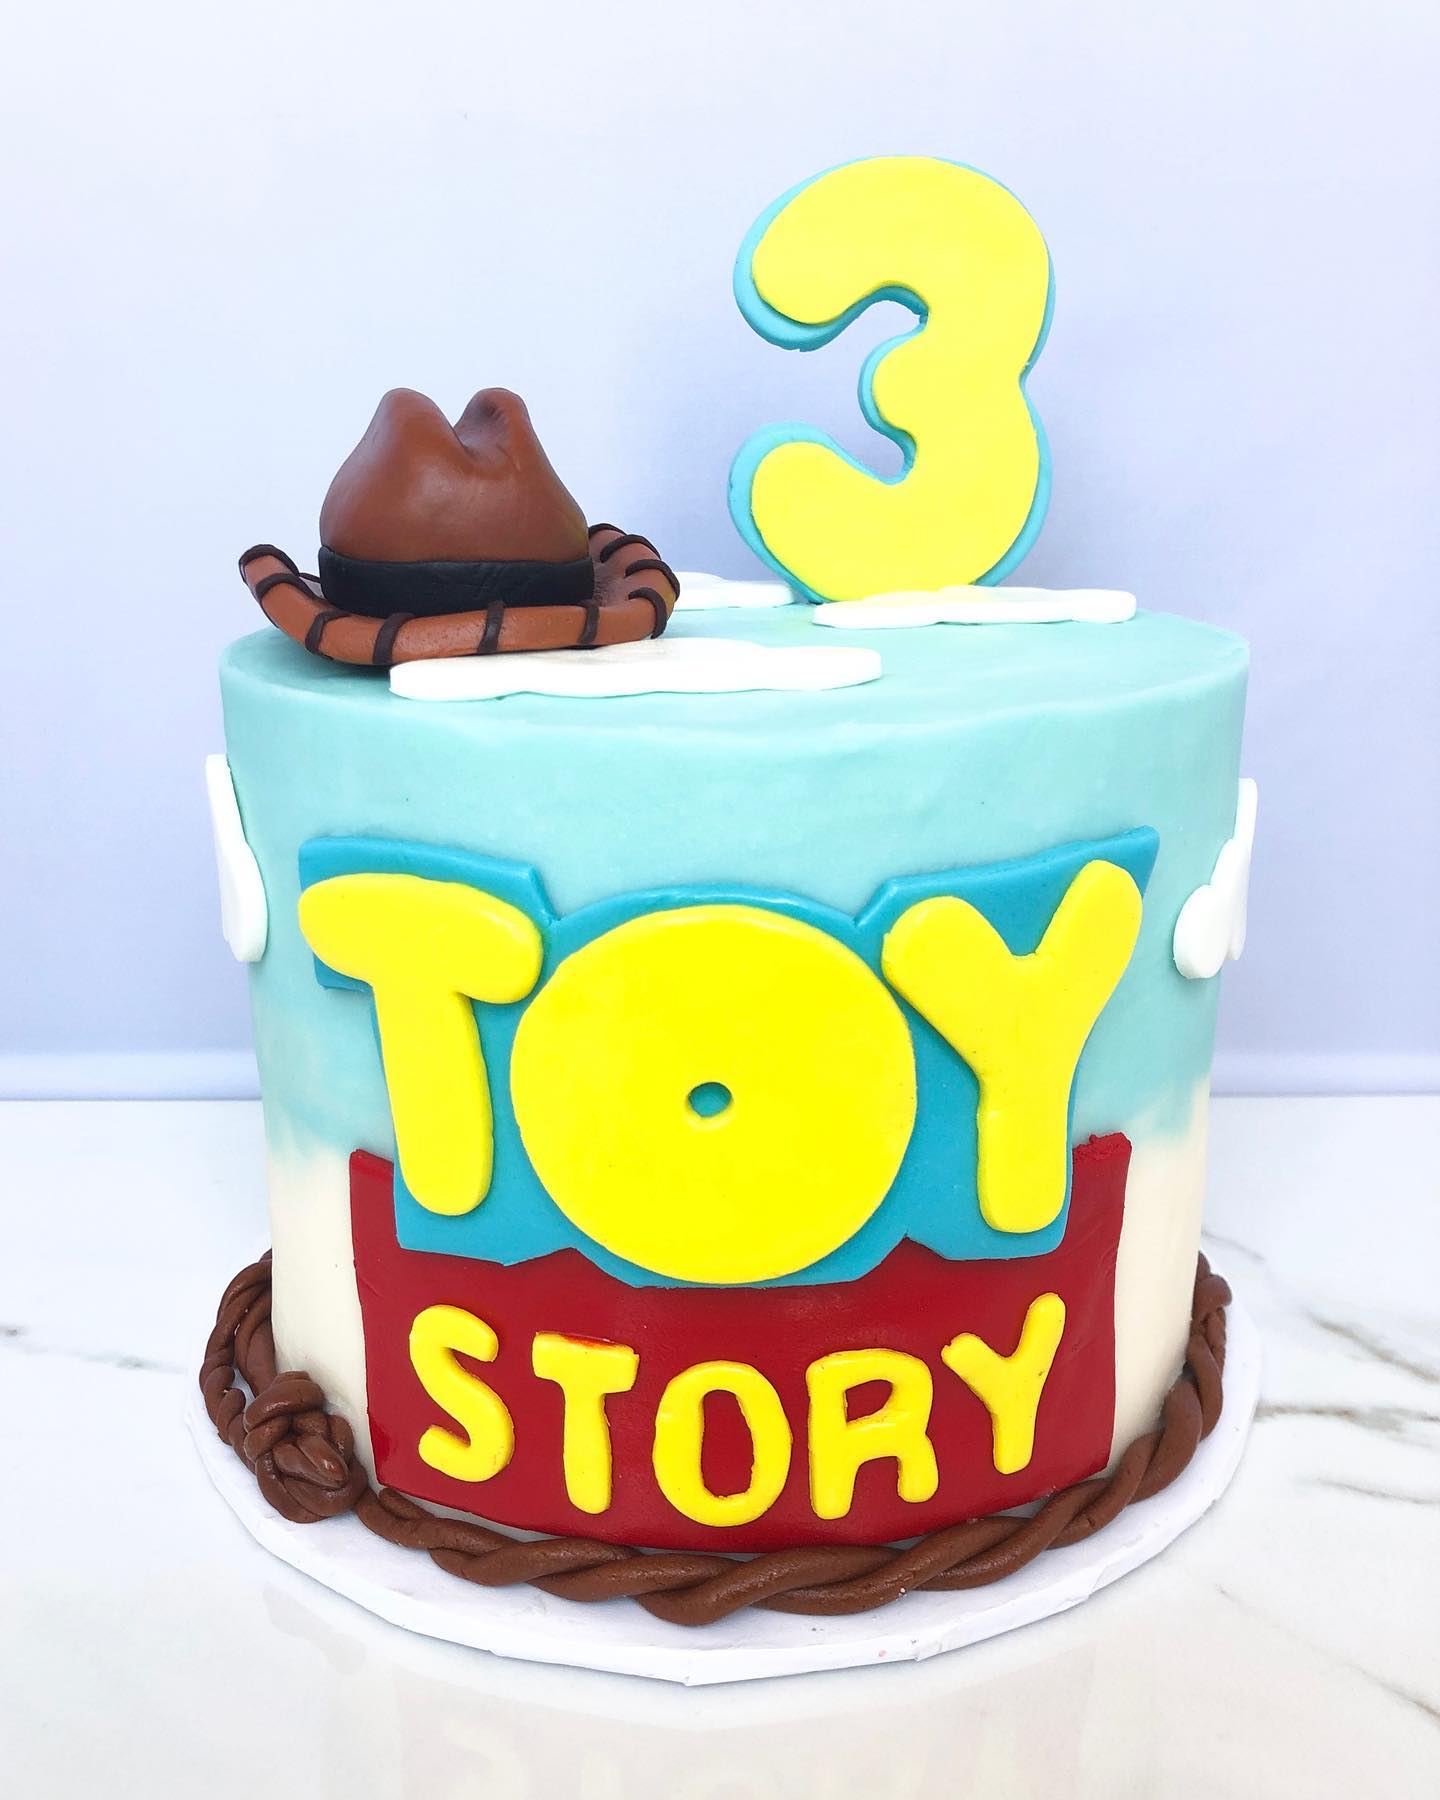 Toy story inspired cake topper/ 3D shaker decoration